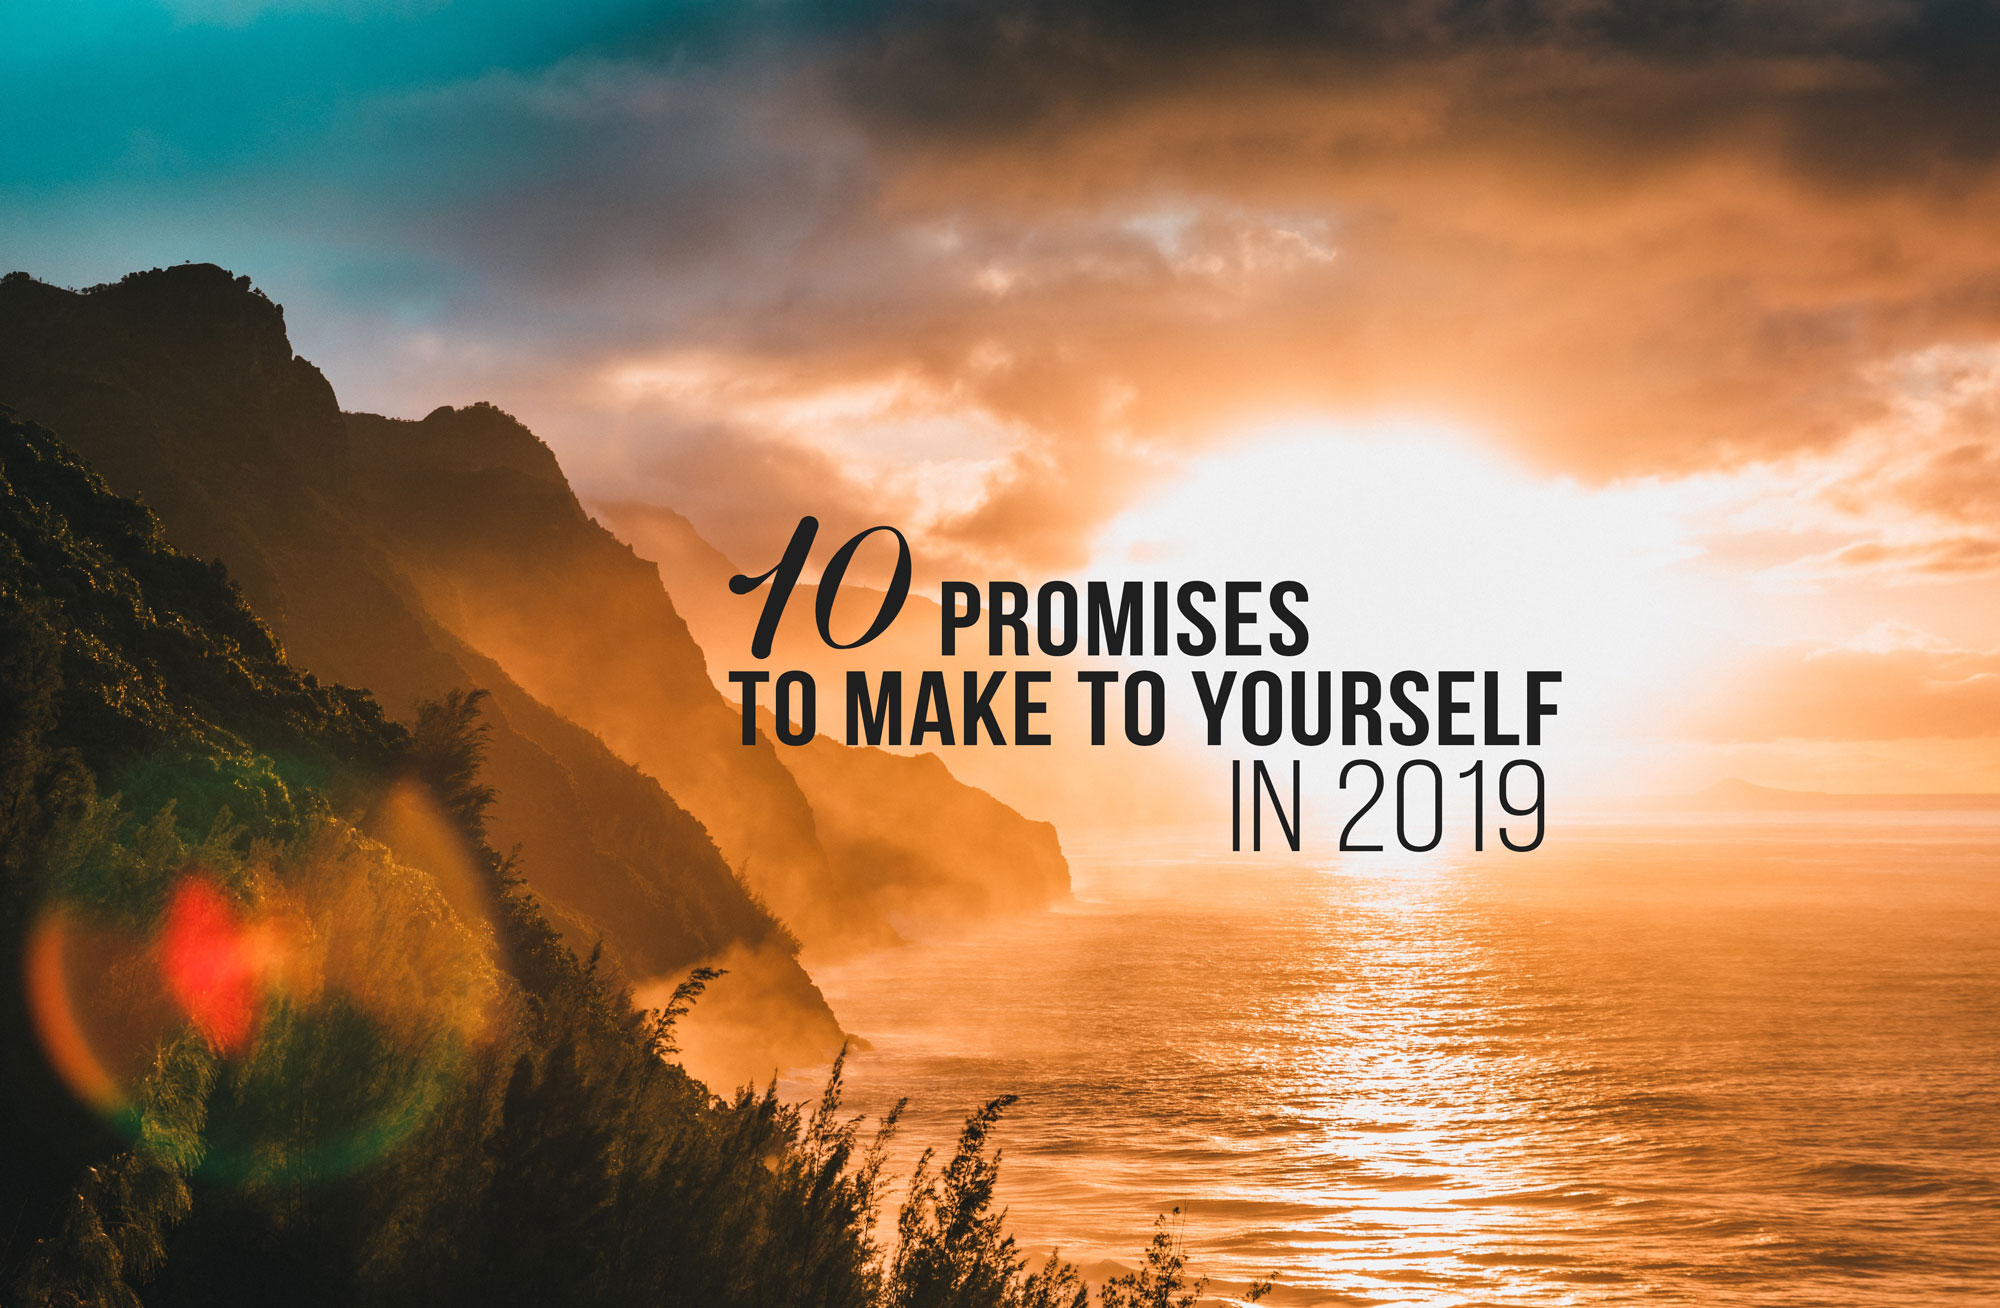 10 Promise to Make to Yourself in 2019